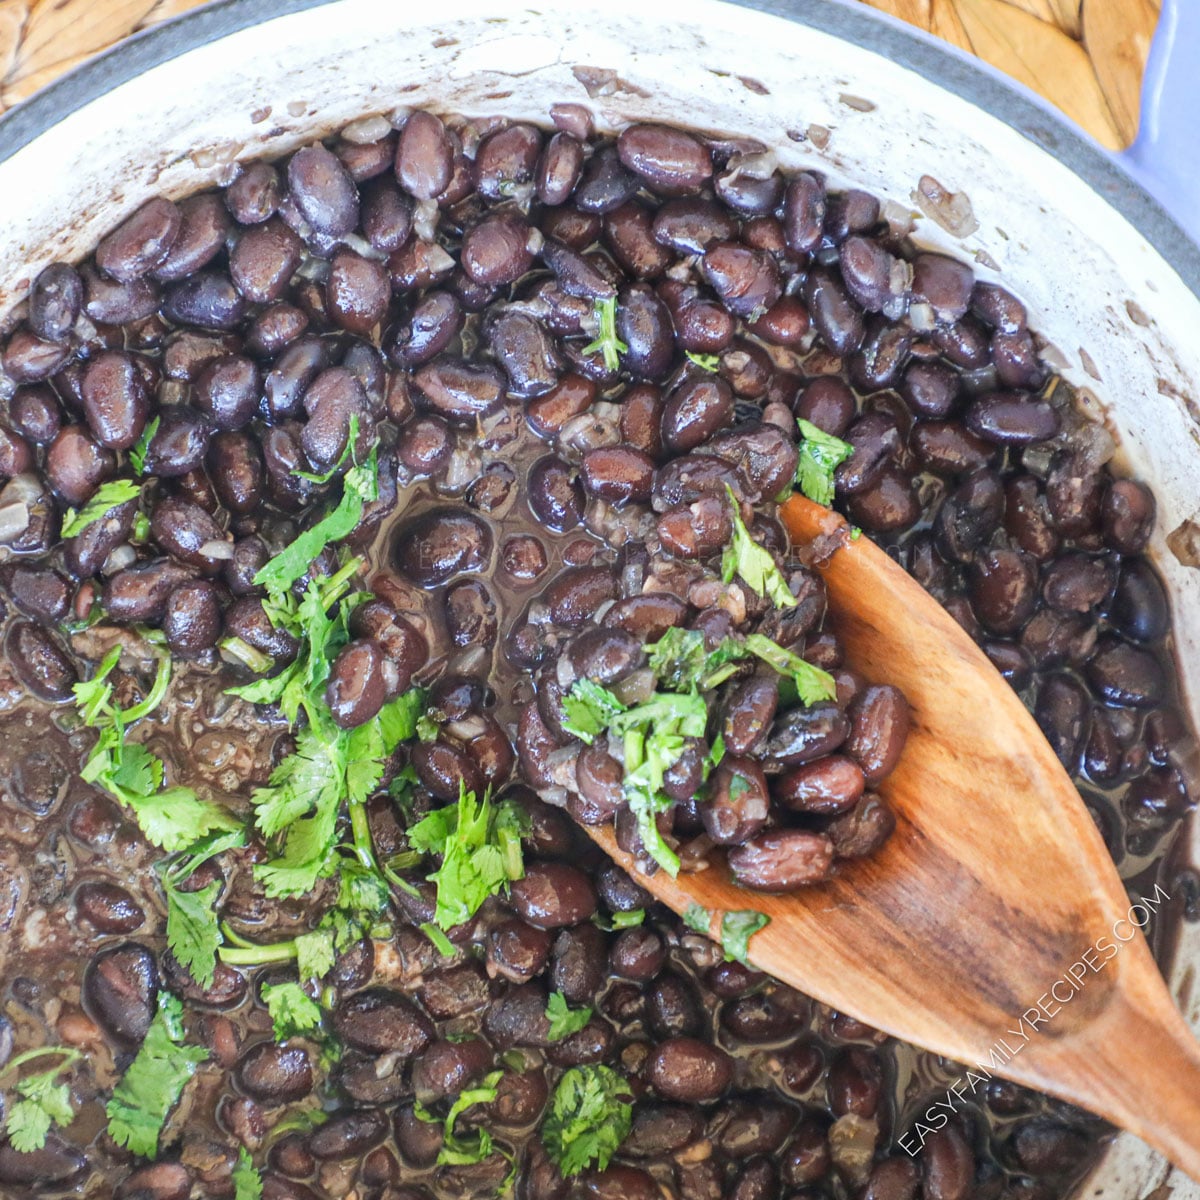 How to Make Canned Black Beans Taste AMAZING!